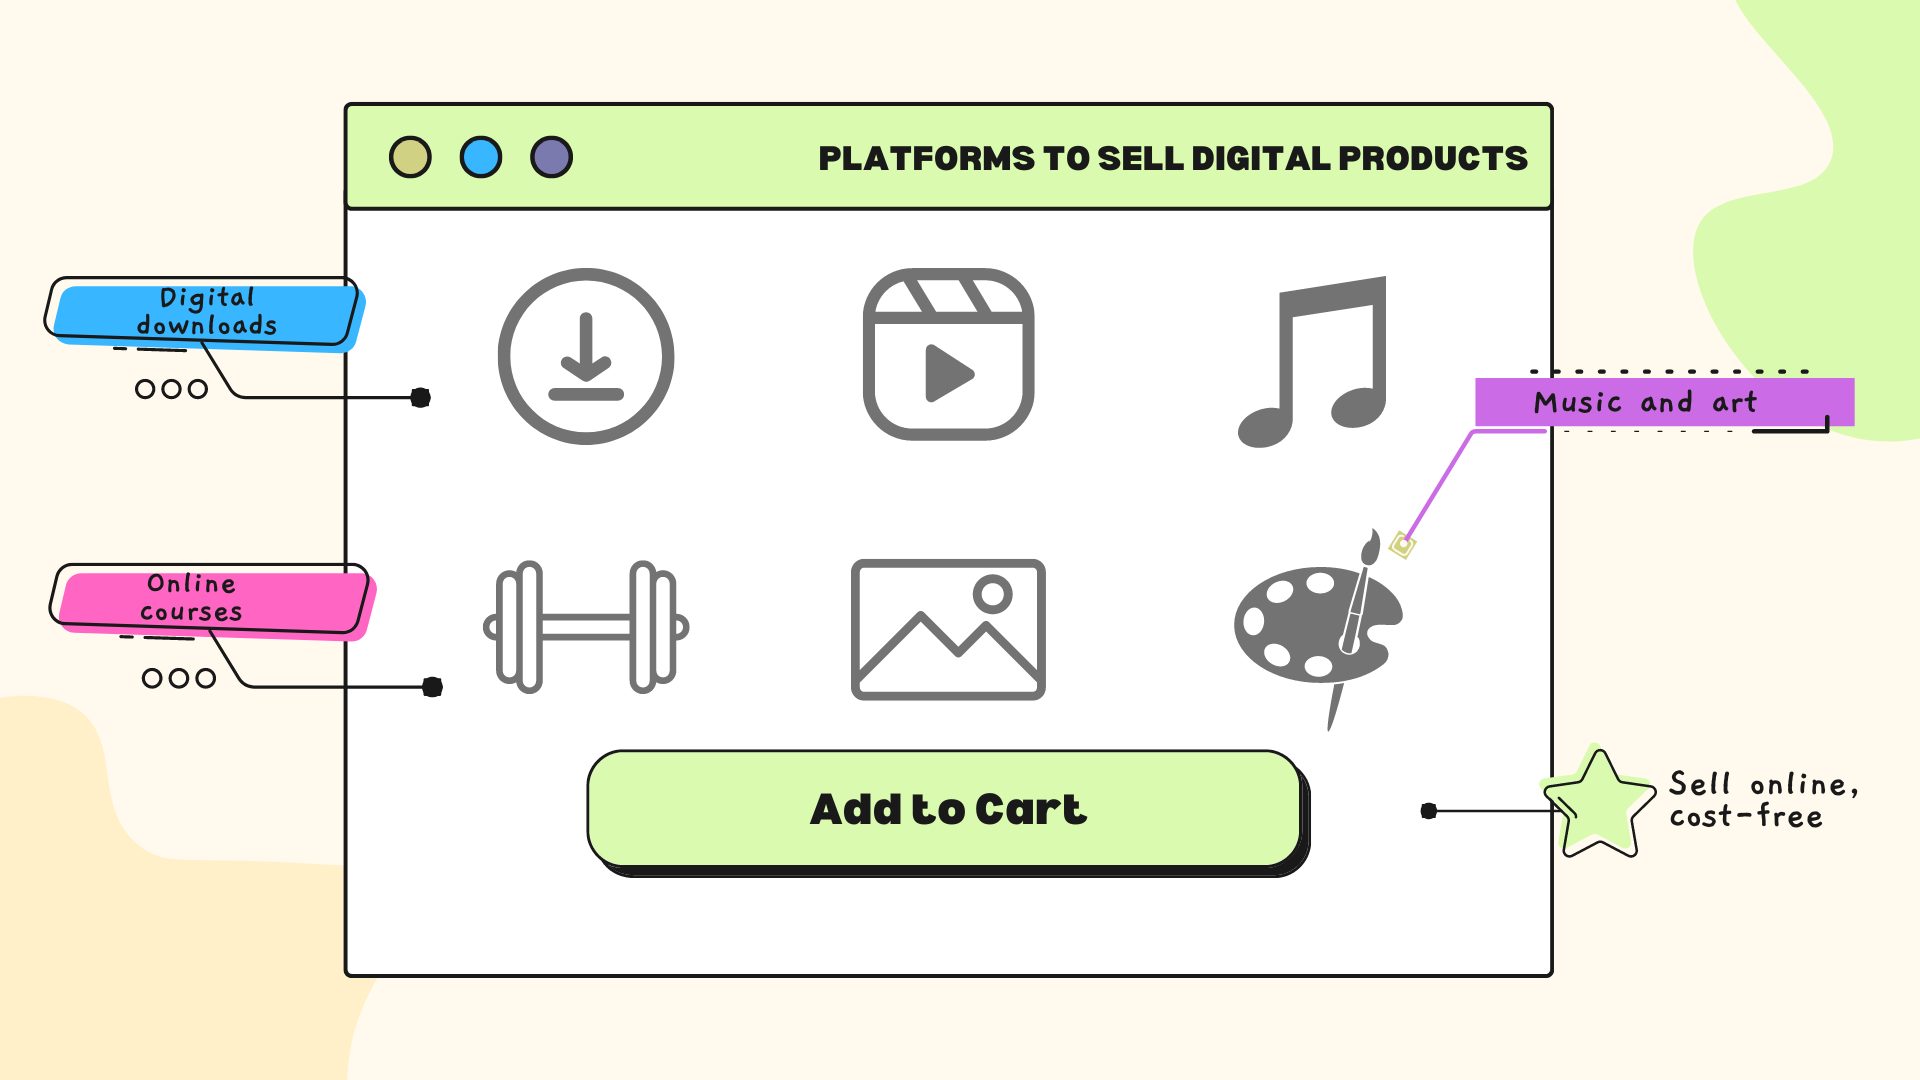 Platforms to Sell Digital Products